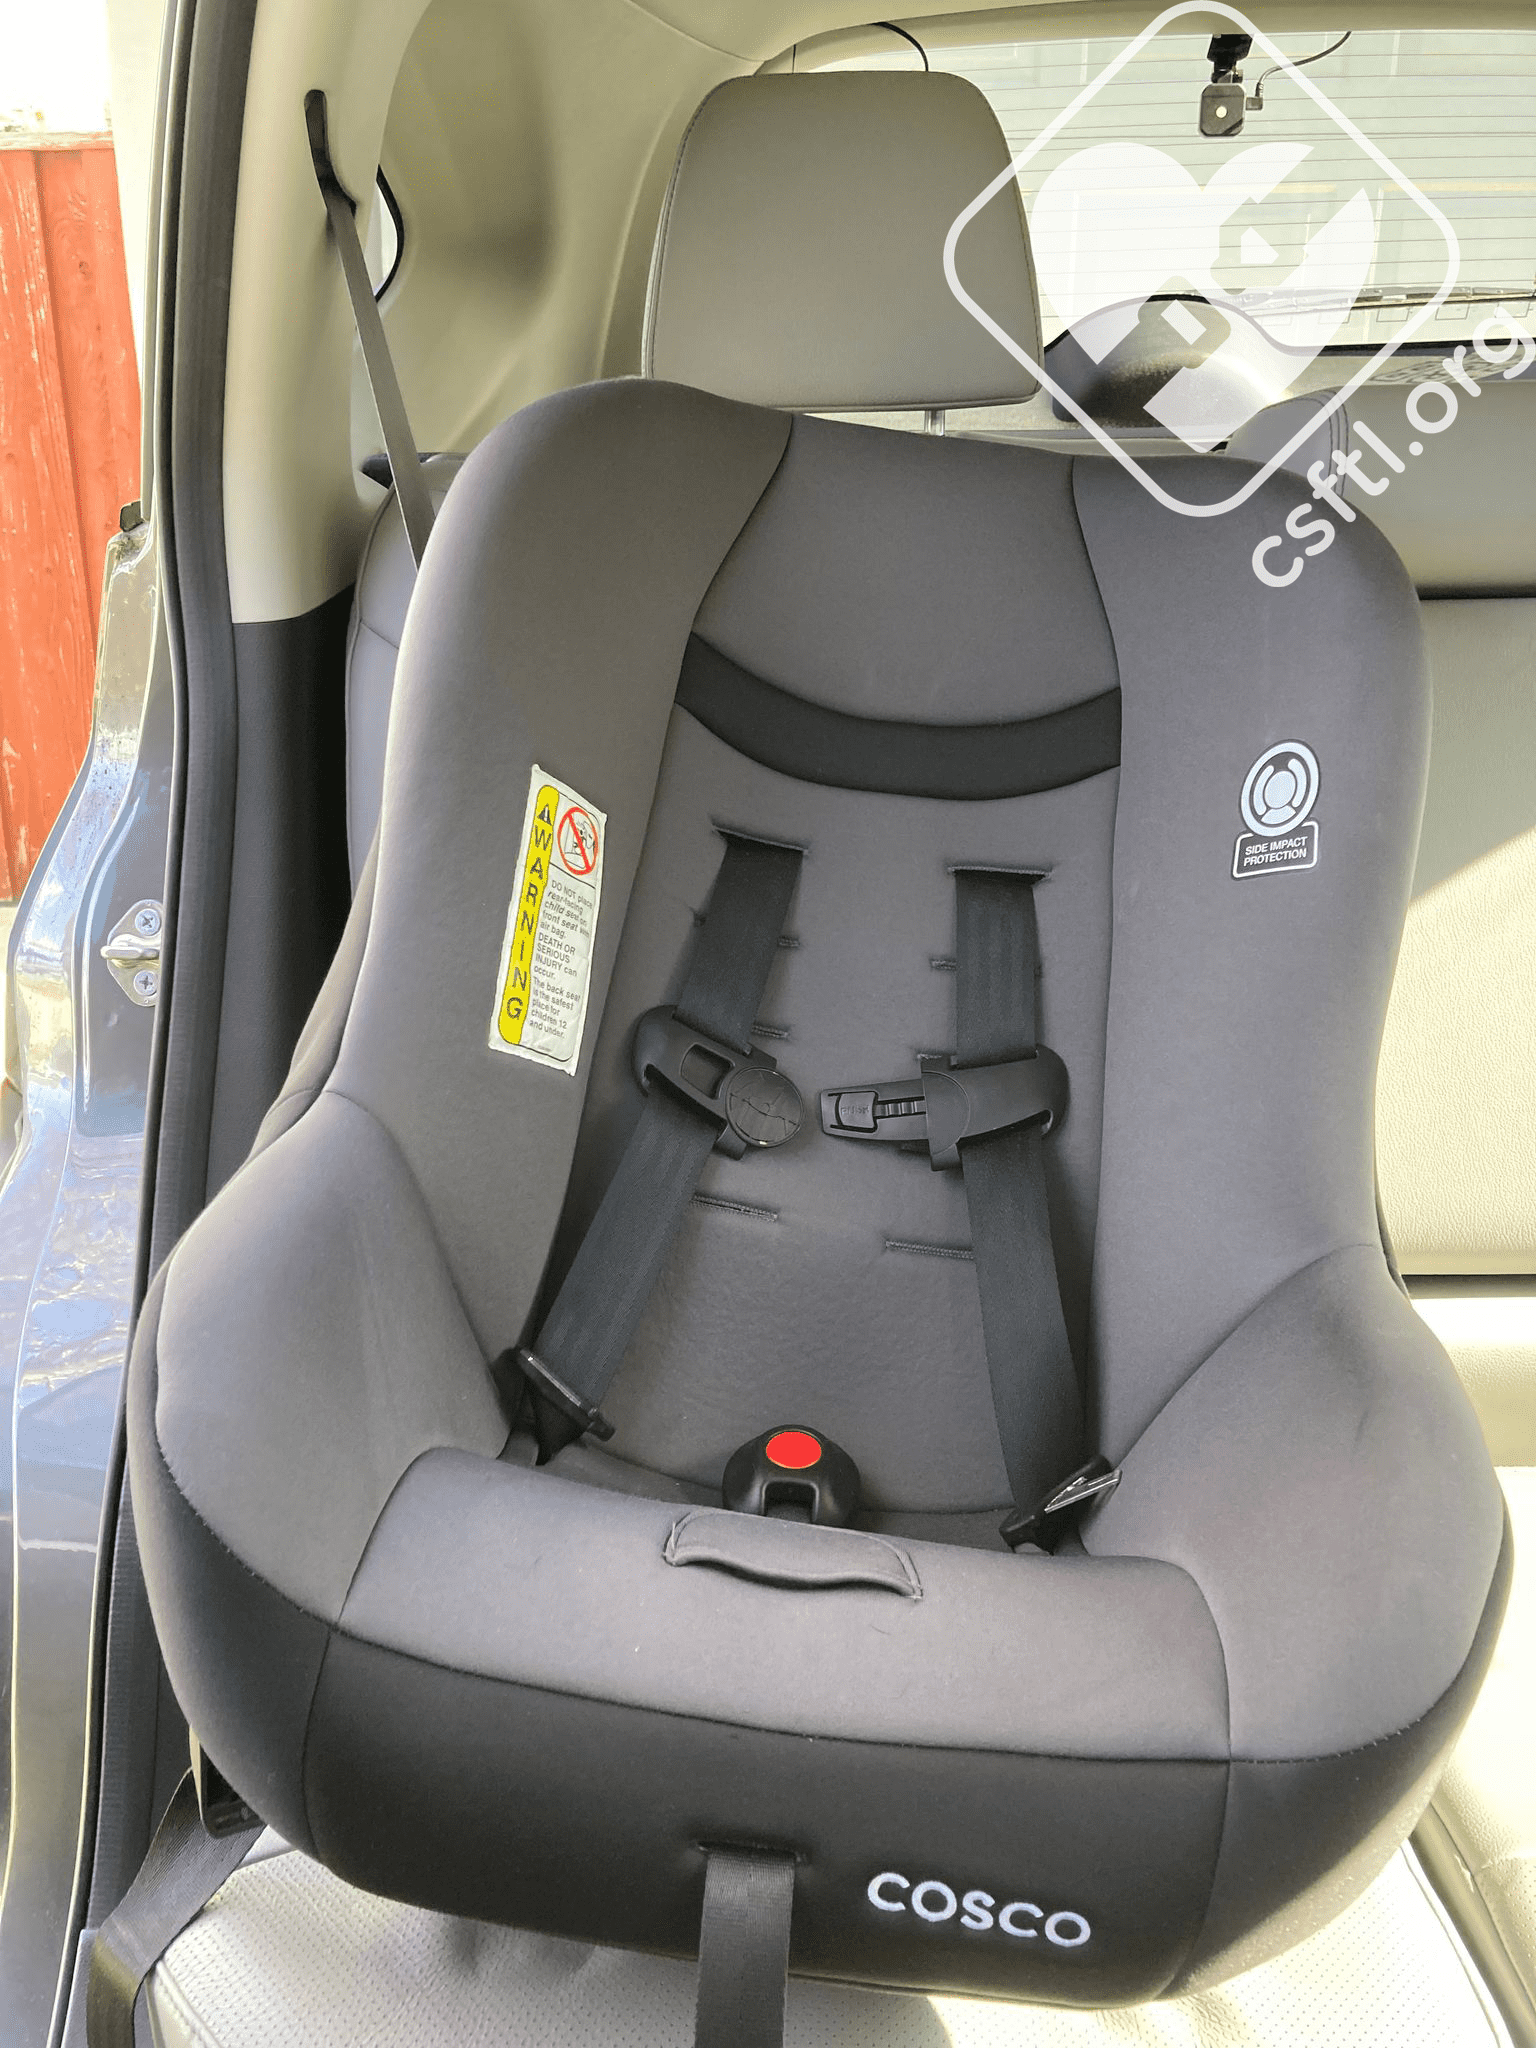 Car Seat Basics: Prevent the Car Seat from Tipping or Tilting